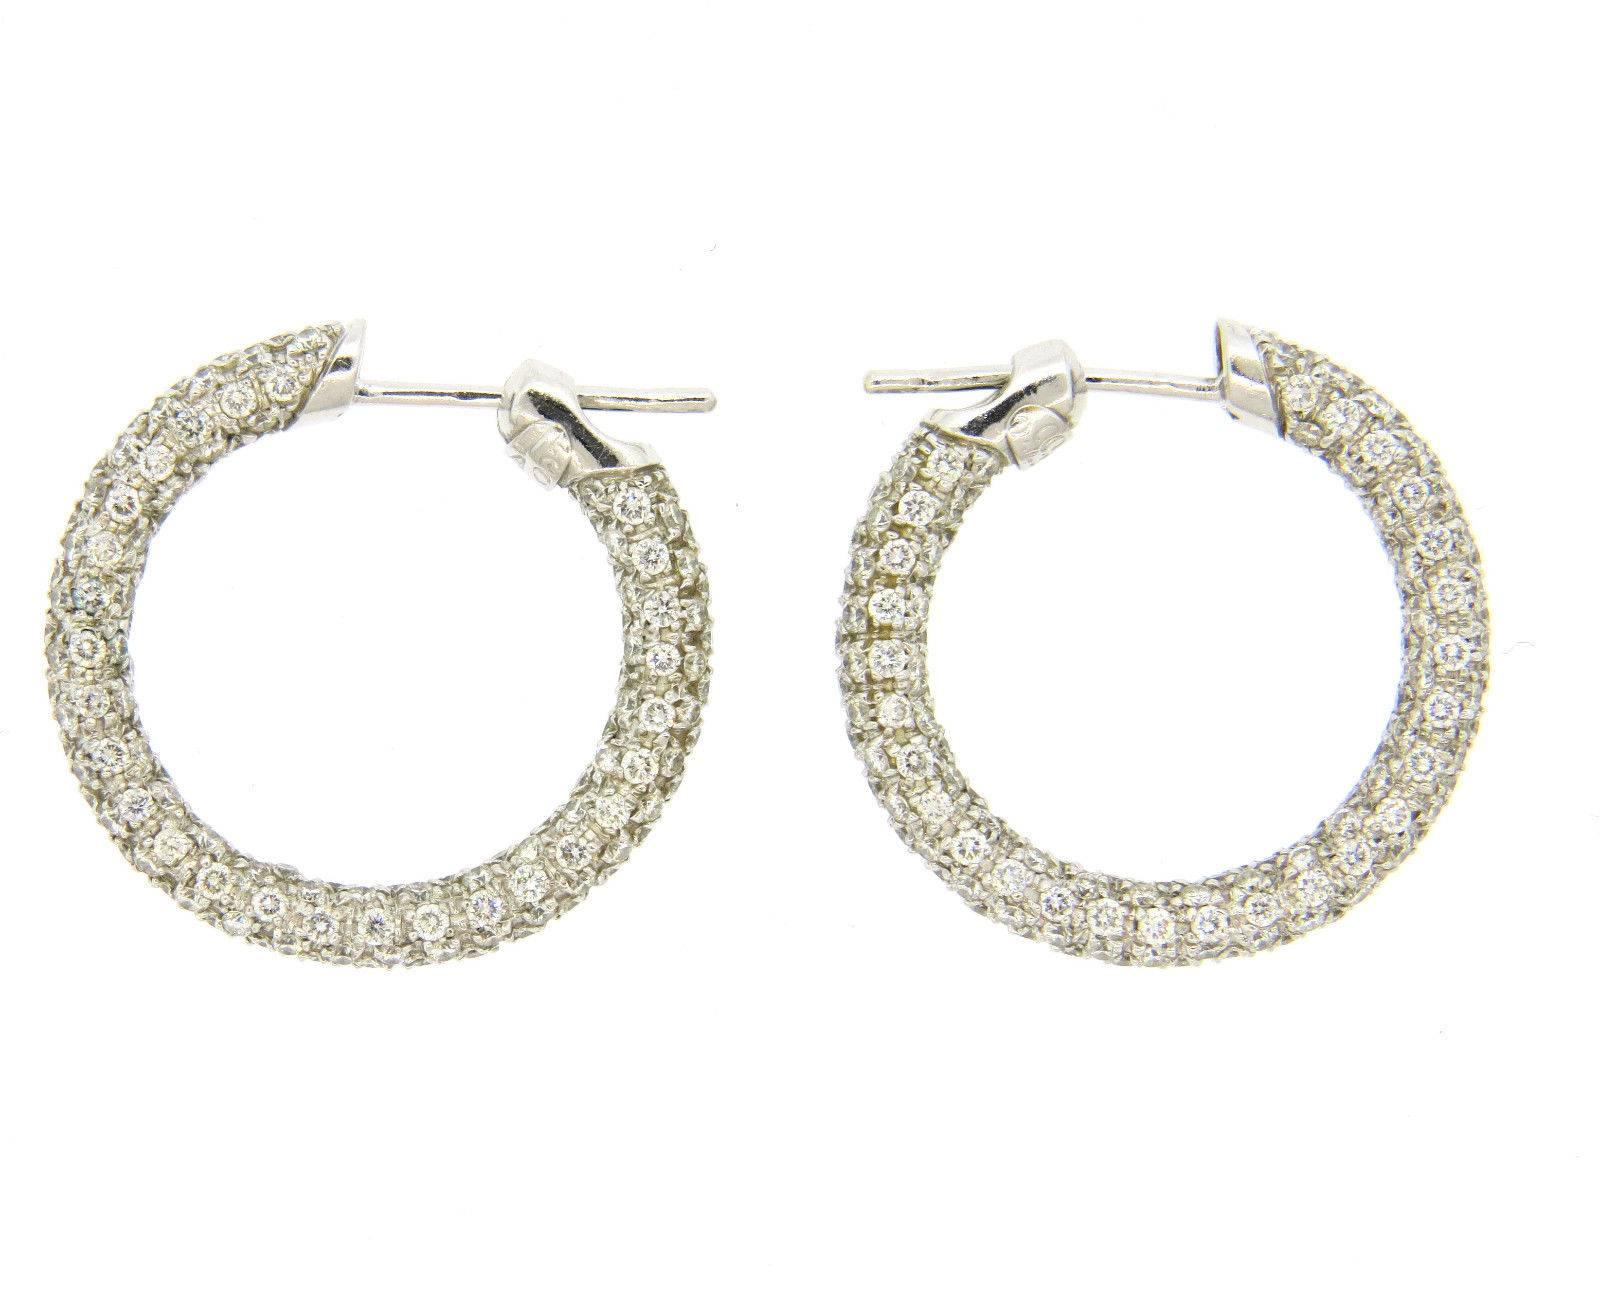 A pair of 18k white gold earrings set with approximately 2.80ctw of G/VS diamonds.  Crafted by Leo Pizzo, the earrings measure 26mm in diameter and are 4.2mm wide.  Marked: 750,Leo Pizzo, Italian mark.  The weight of the earrings is 10.1 grams.